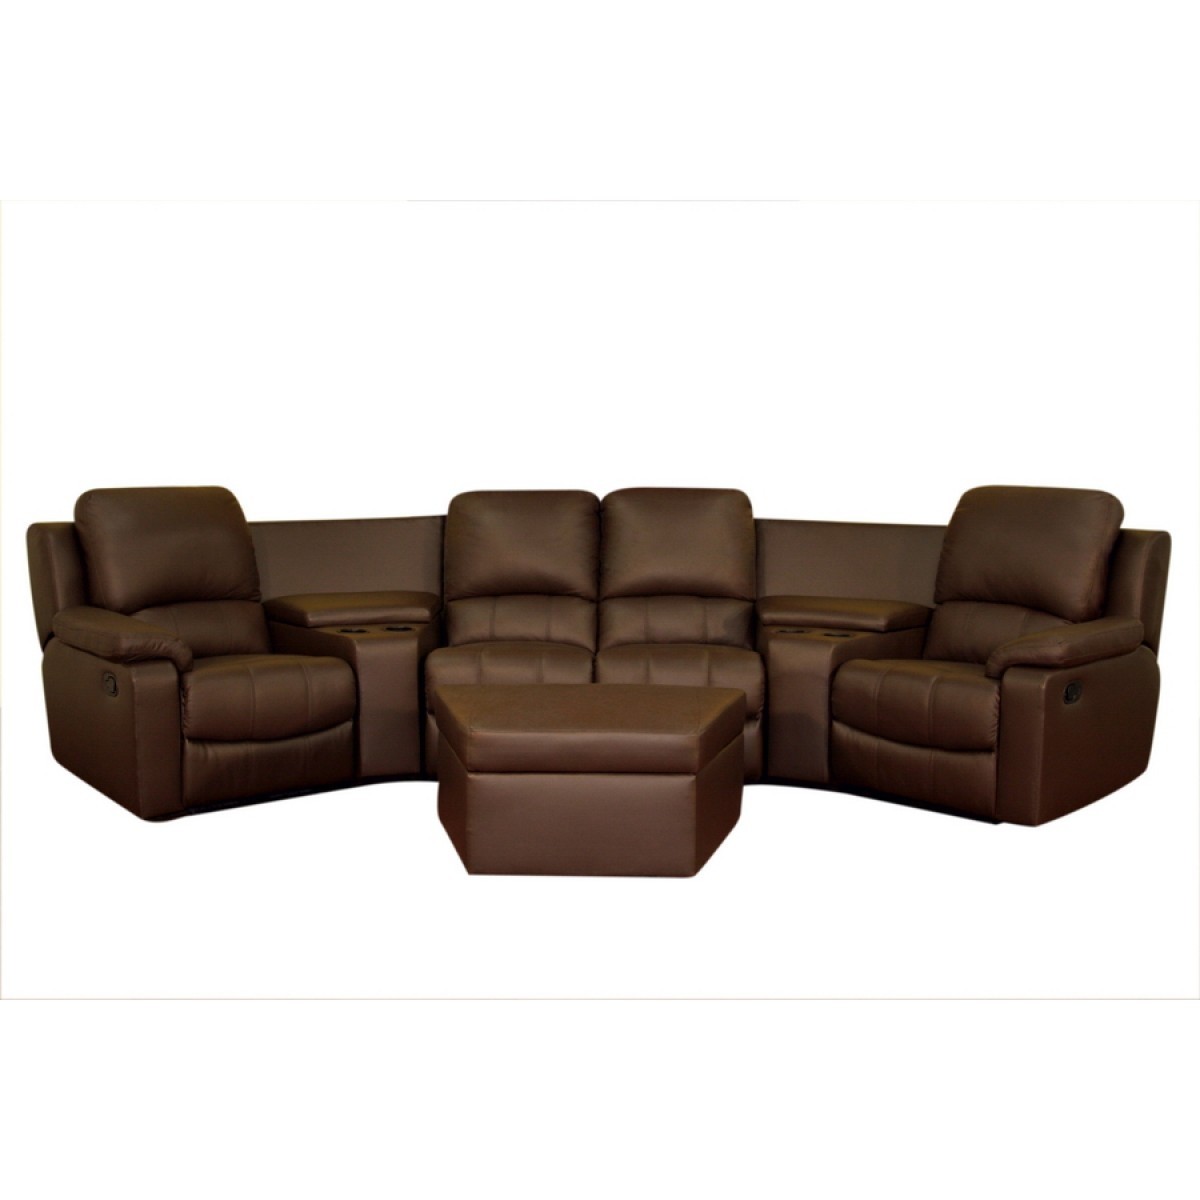 Curved reclining sofa